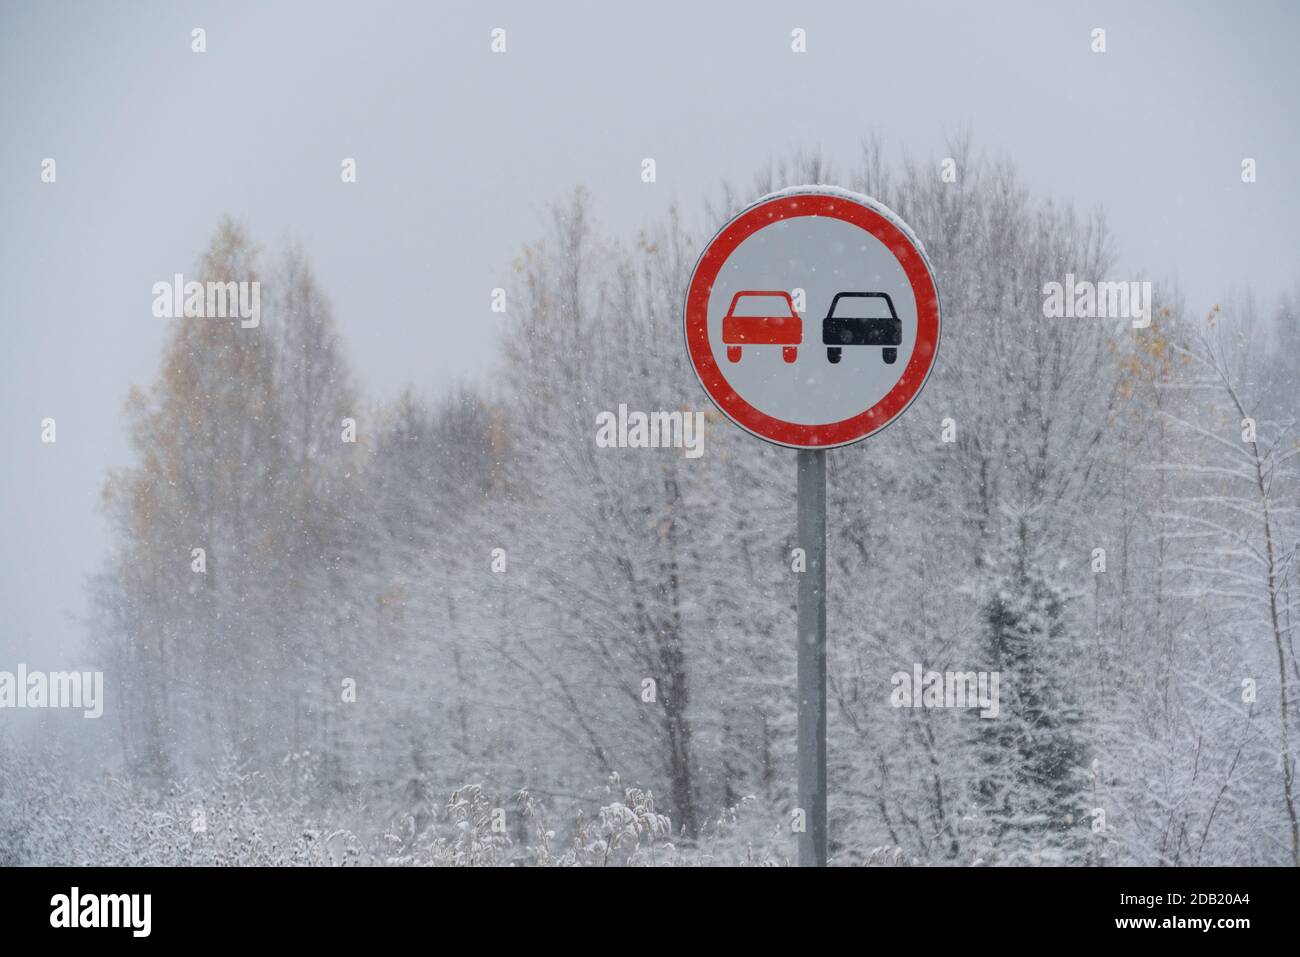 No overtaking sign on the winter road Stock Photo